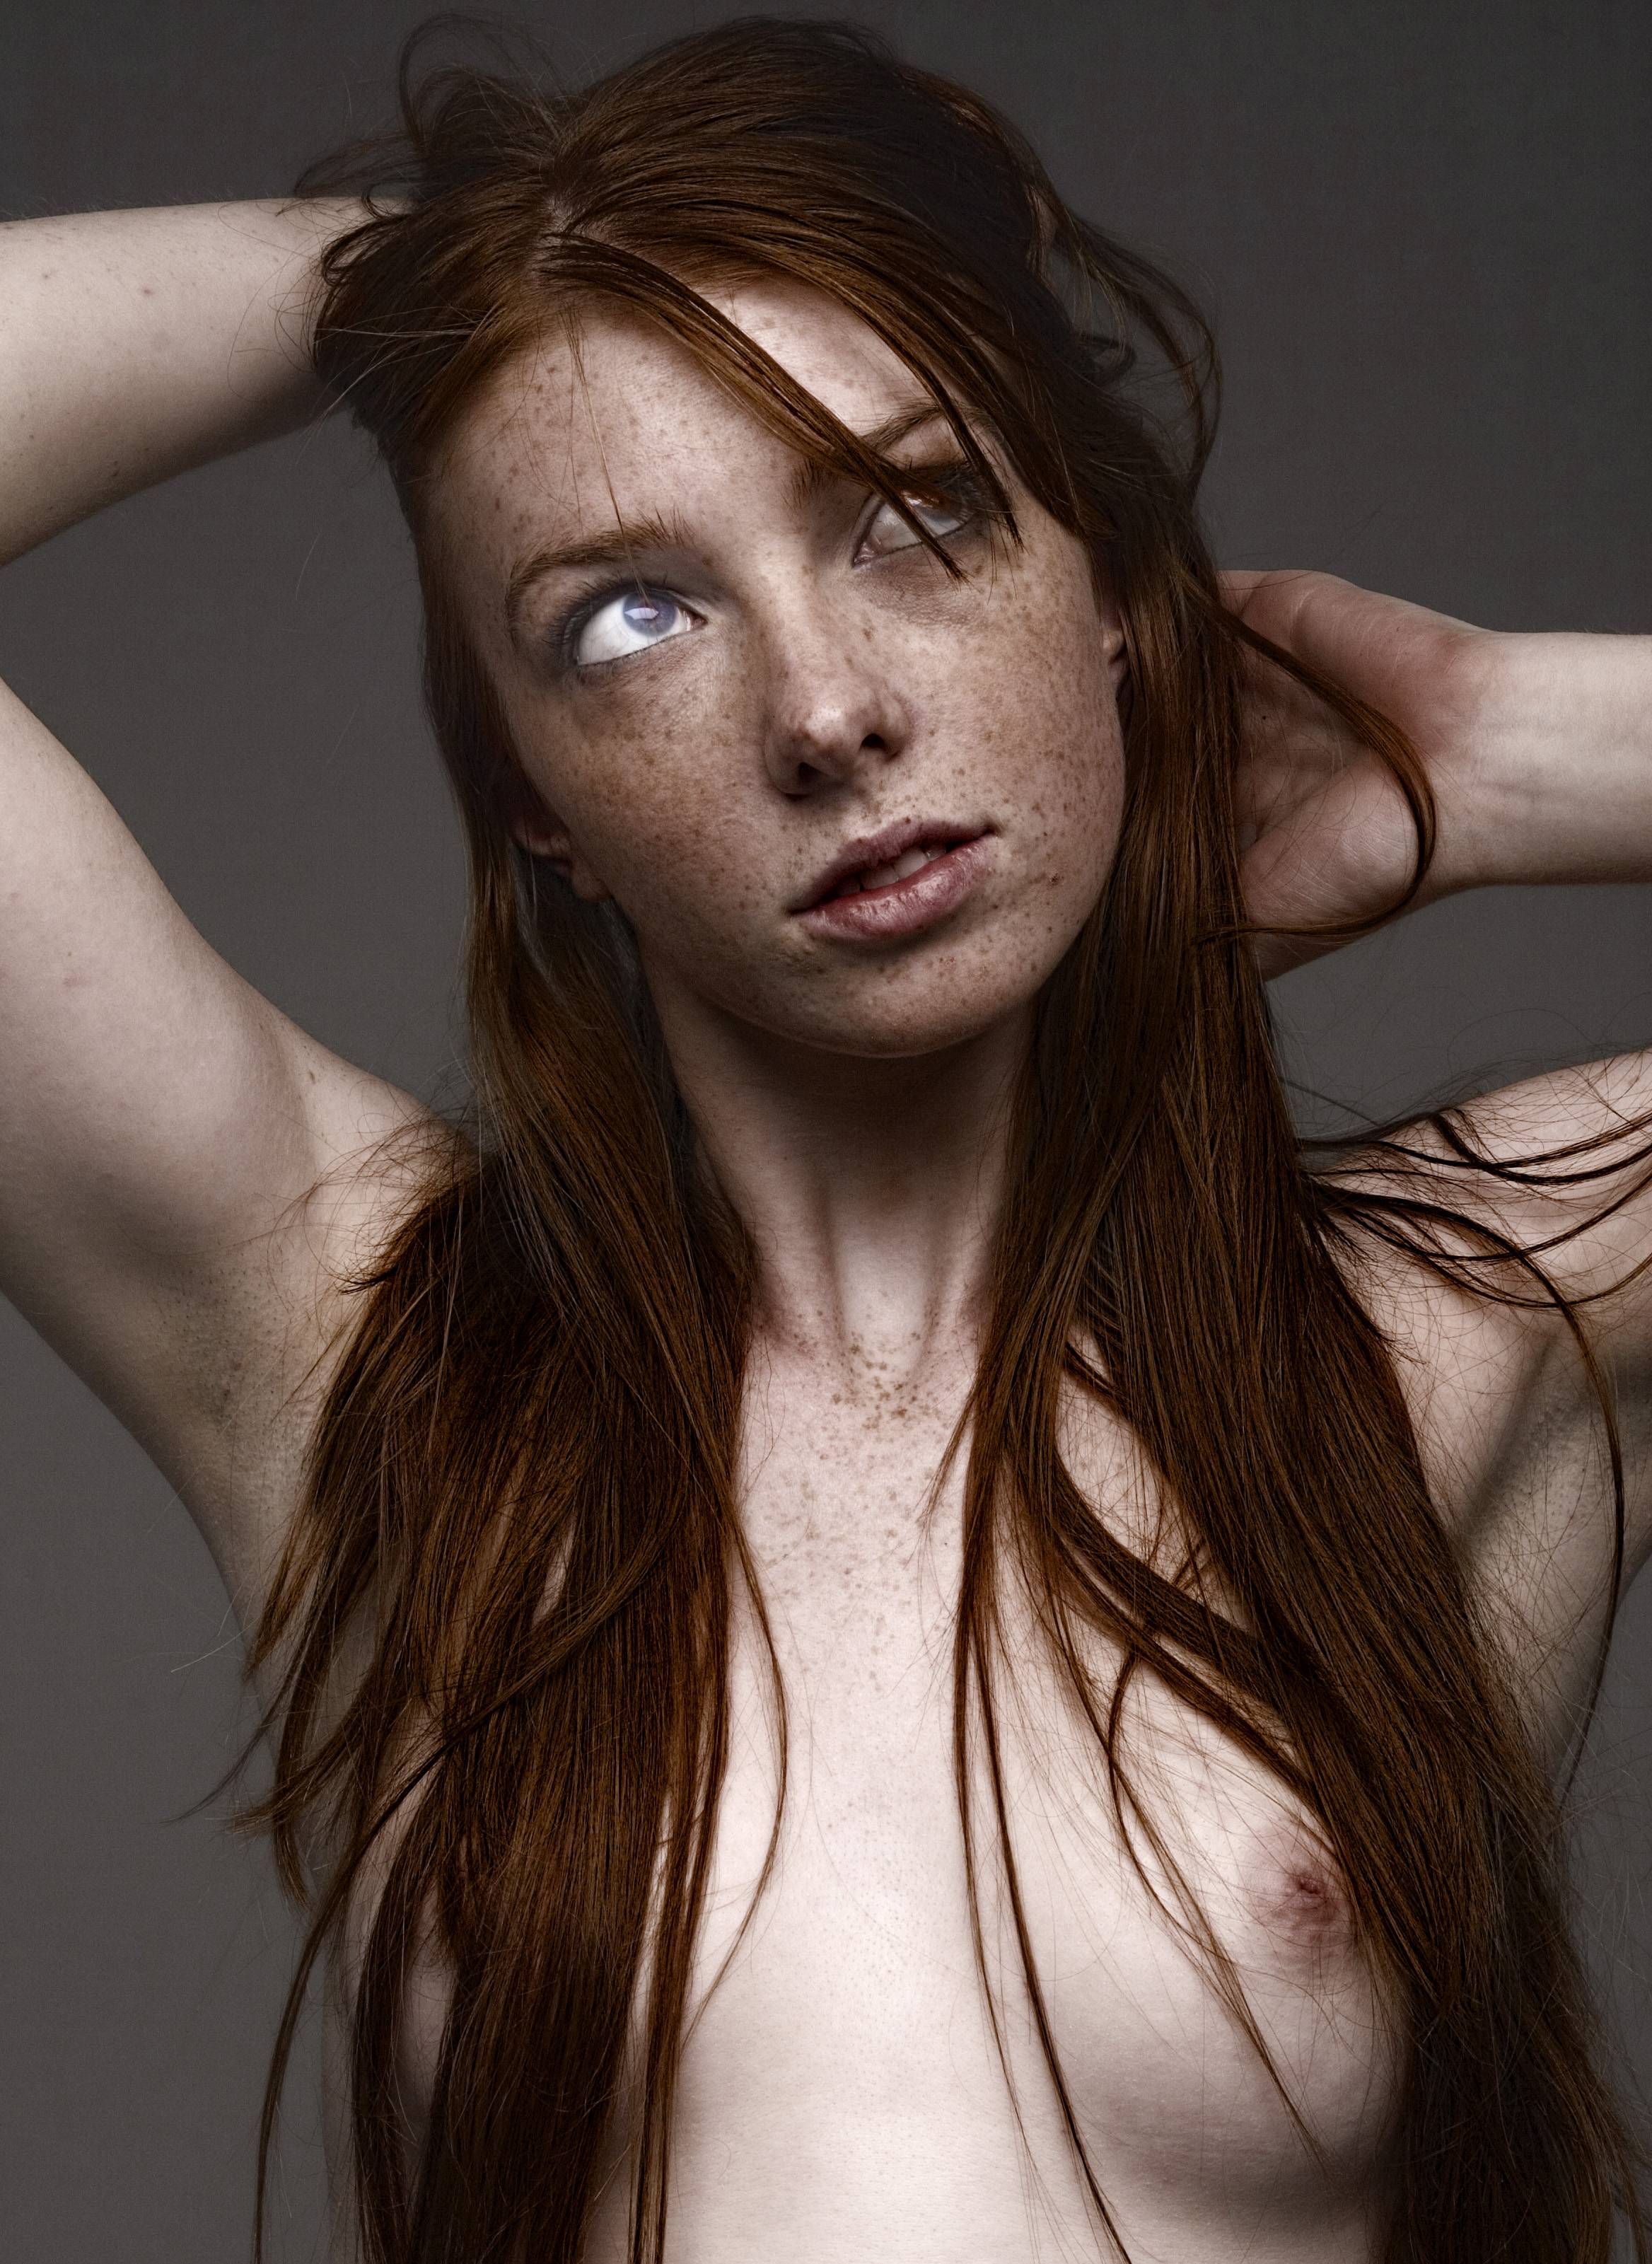 Nude women with freckles ♥ Naked Women With Freckles - Porn 